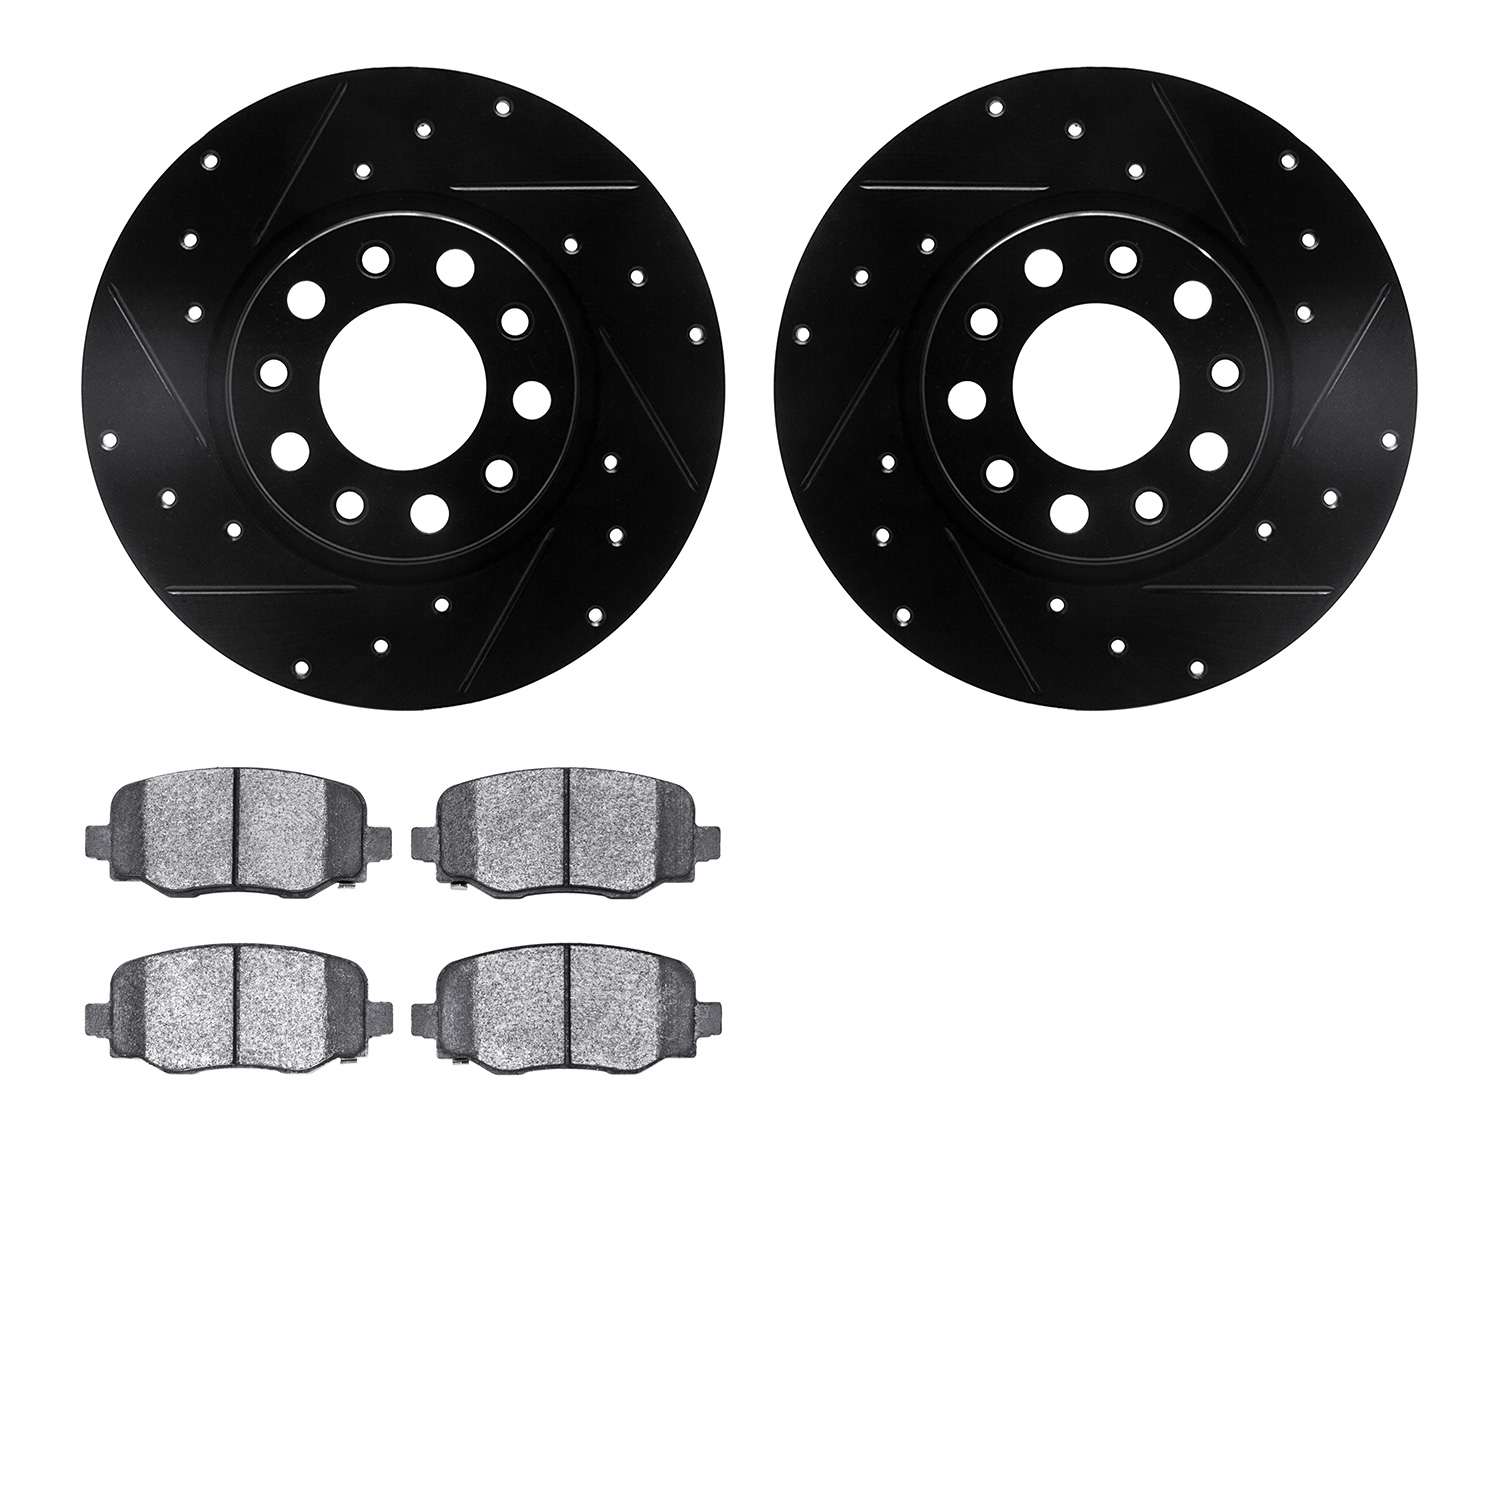 8402-42013 Drilled/Slotted Brake Rotors with Ultimate-Duty Brake Pads Kit [Black], Fits Select Mopar, Position: Rear